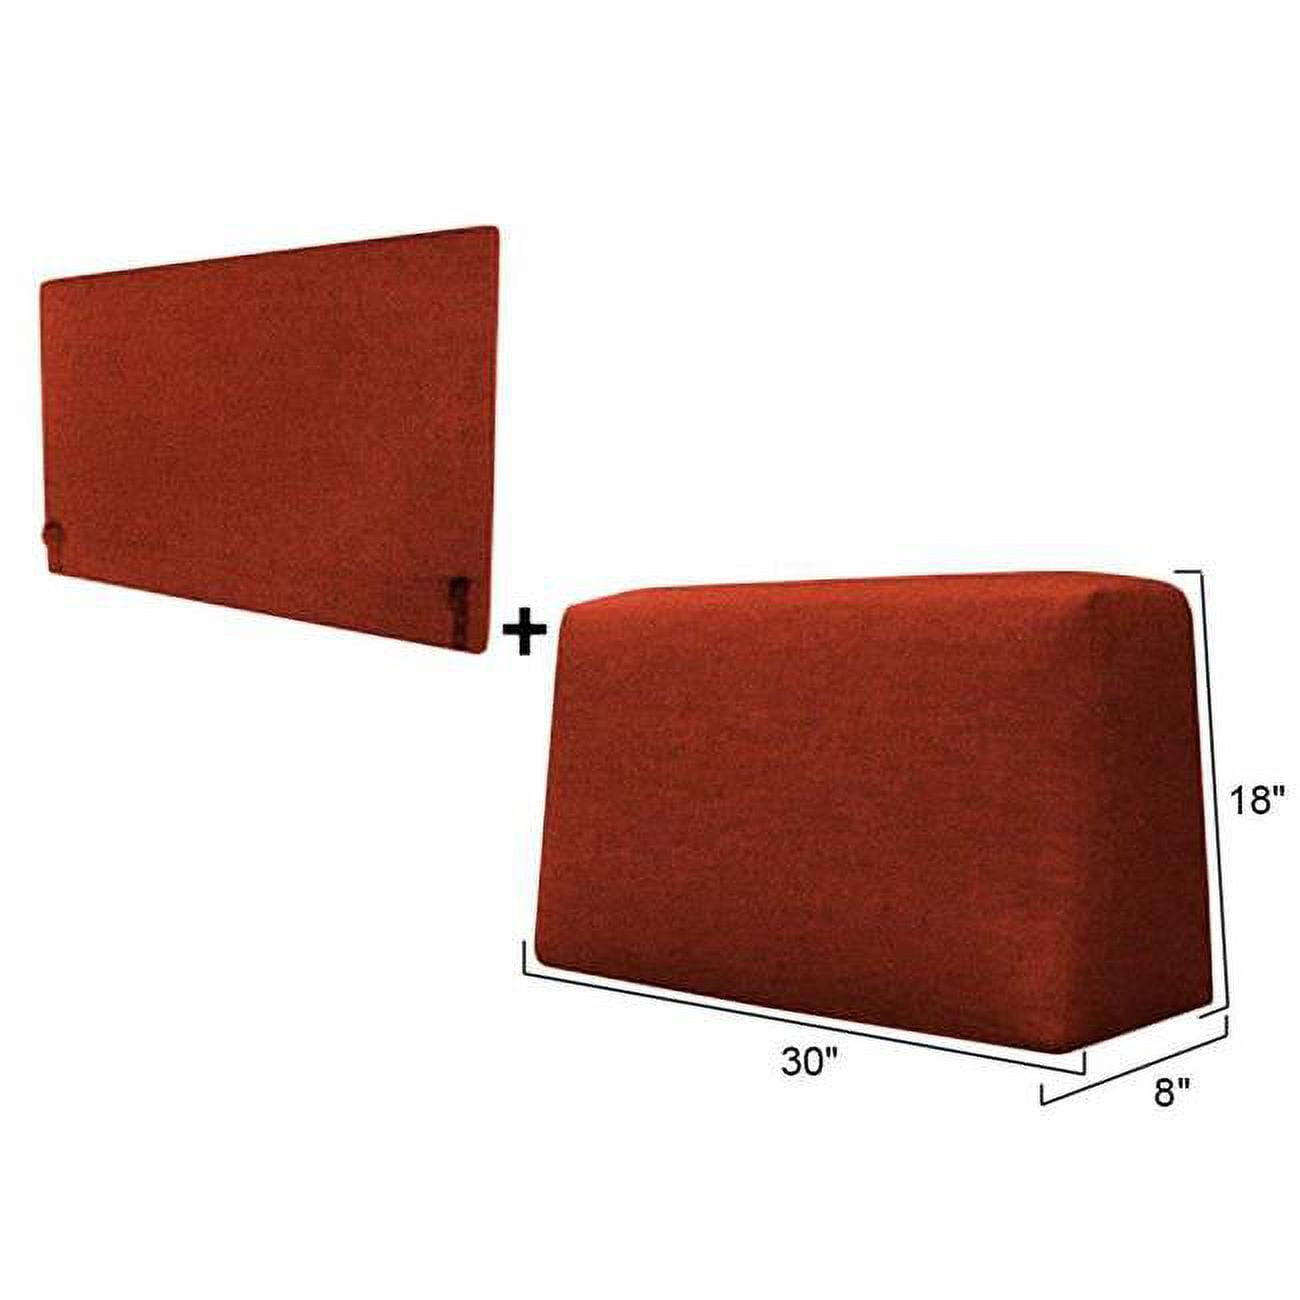 Sbbs30-tc 30 In. Sofa Back Pillow & Back Support Package - Deep Ocean